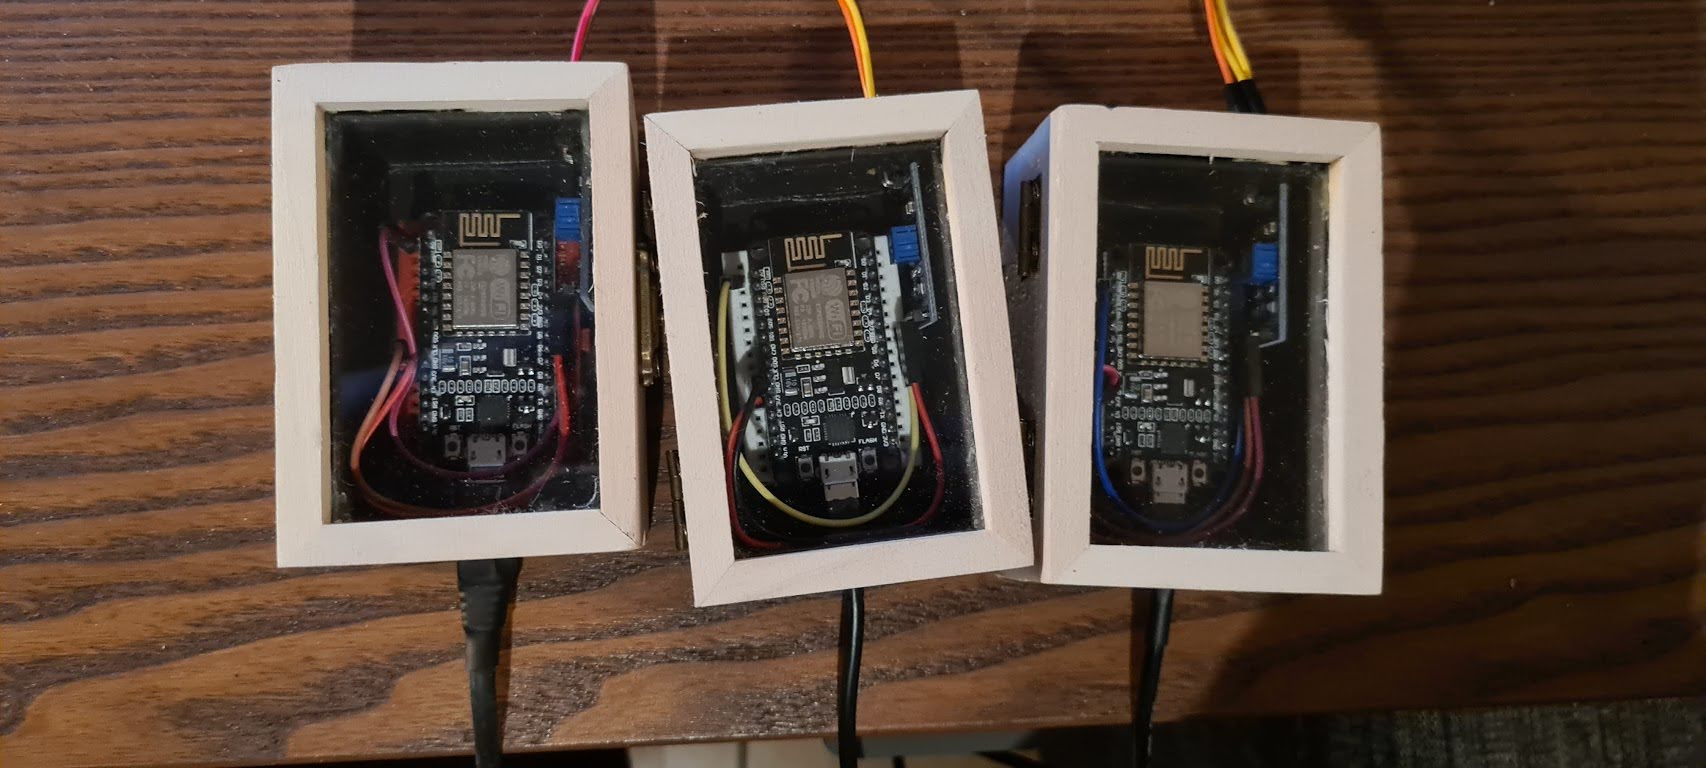 ESP8266 controllers enclosed in wooden boxes